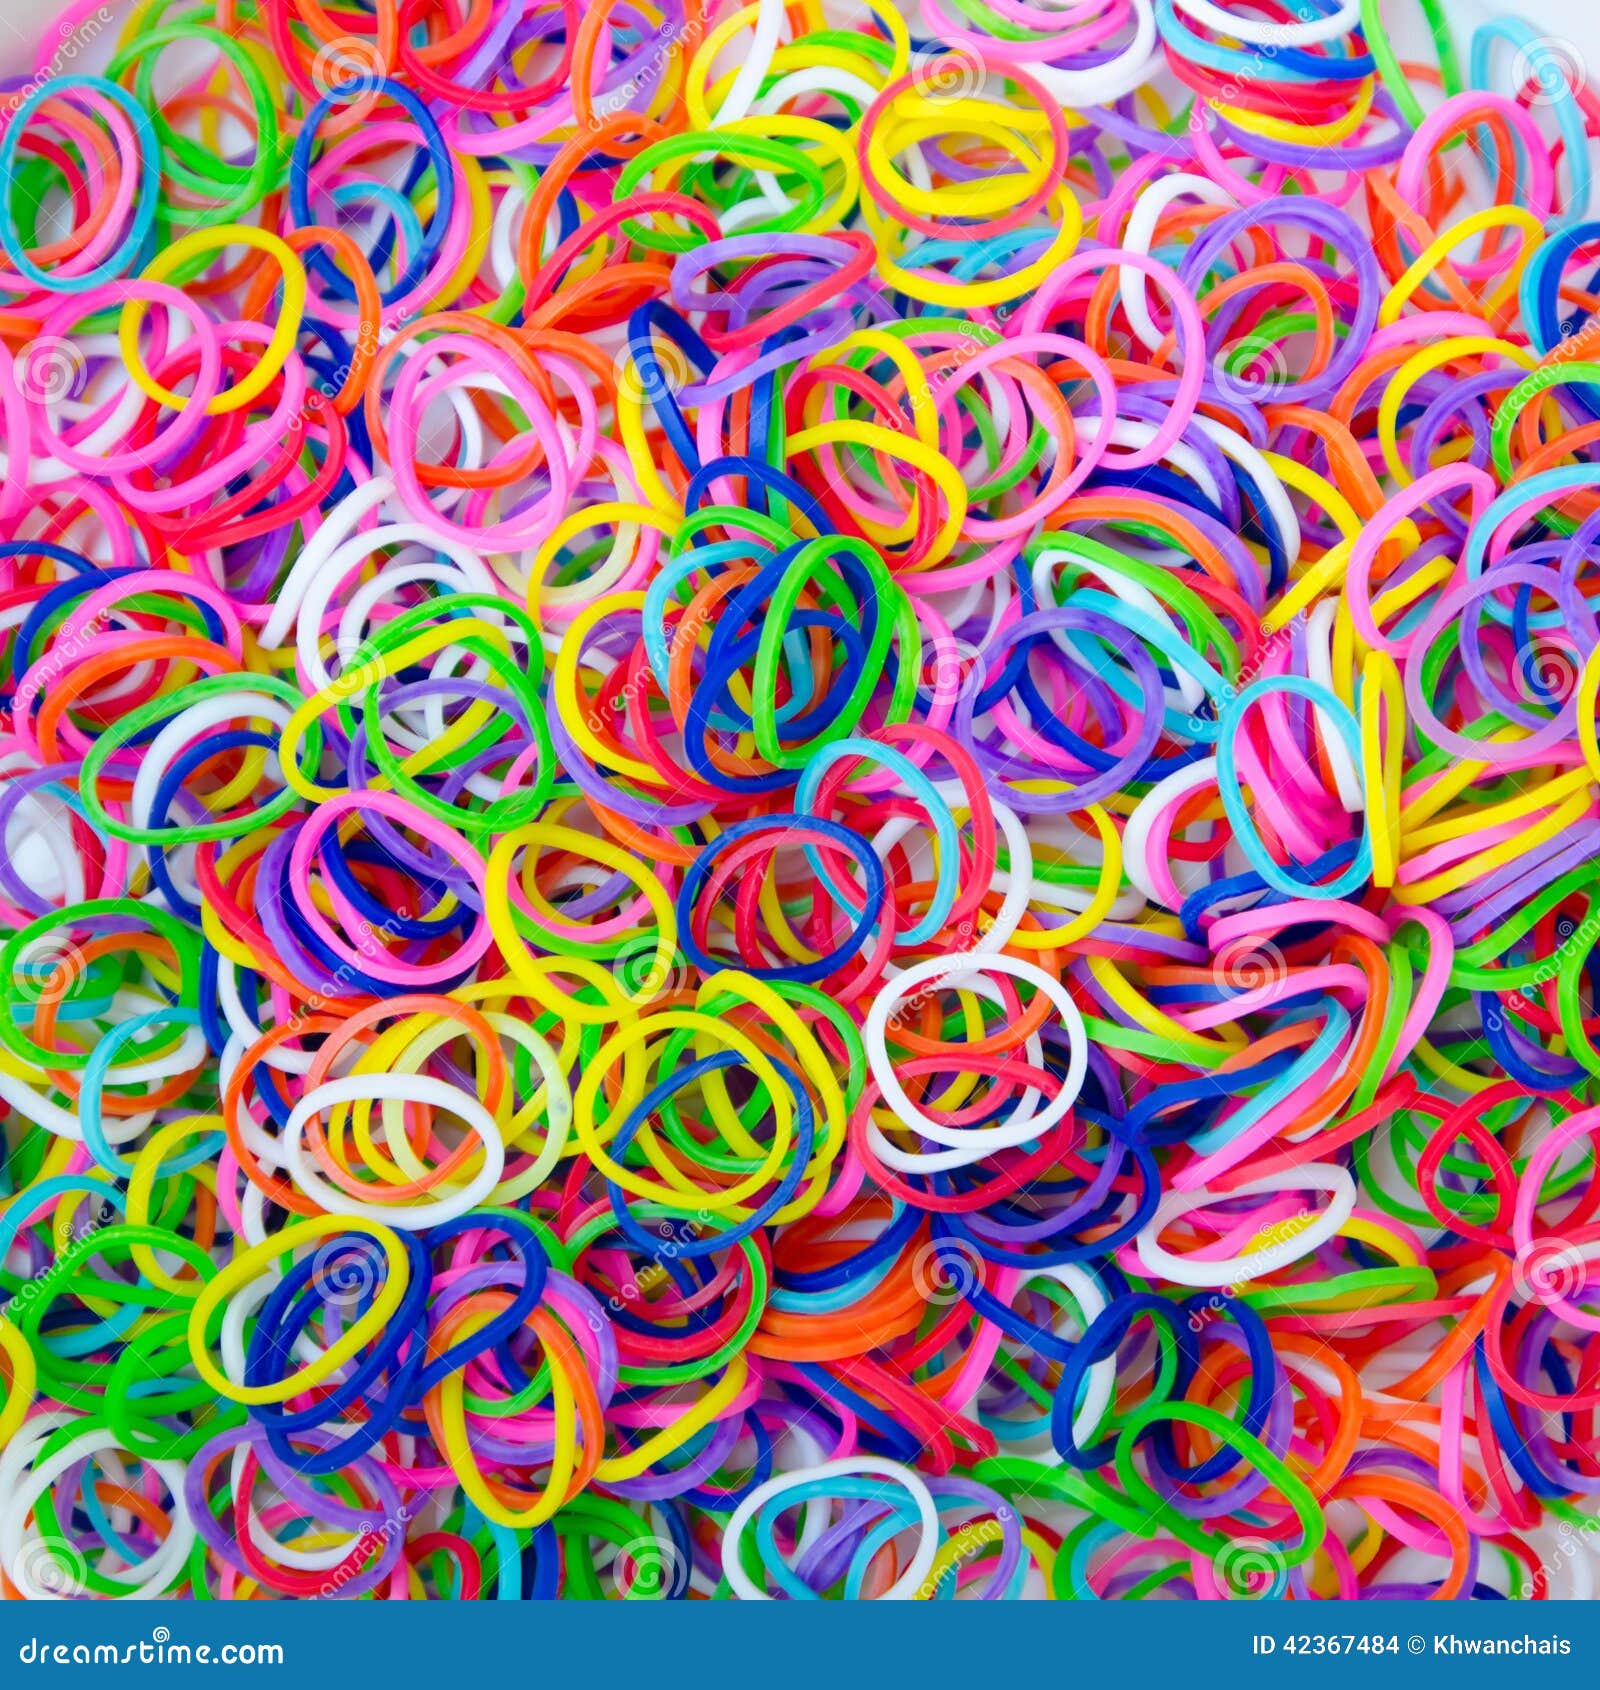 Colorful Rubber Rainbow Loom Band Bracelets On Hand Stock Photo